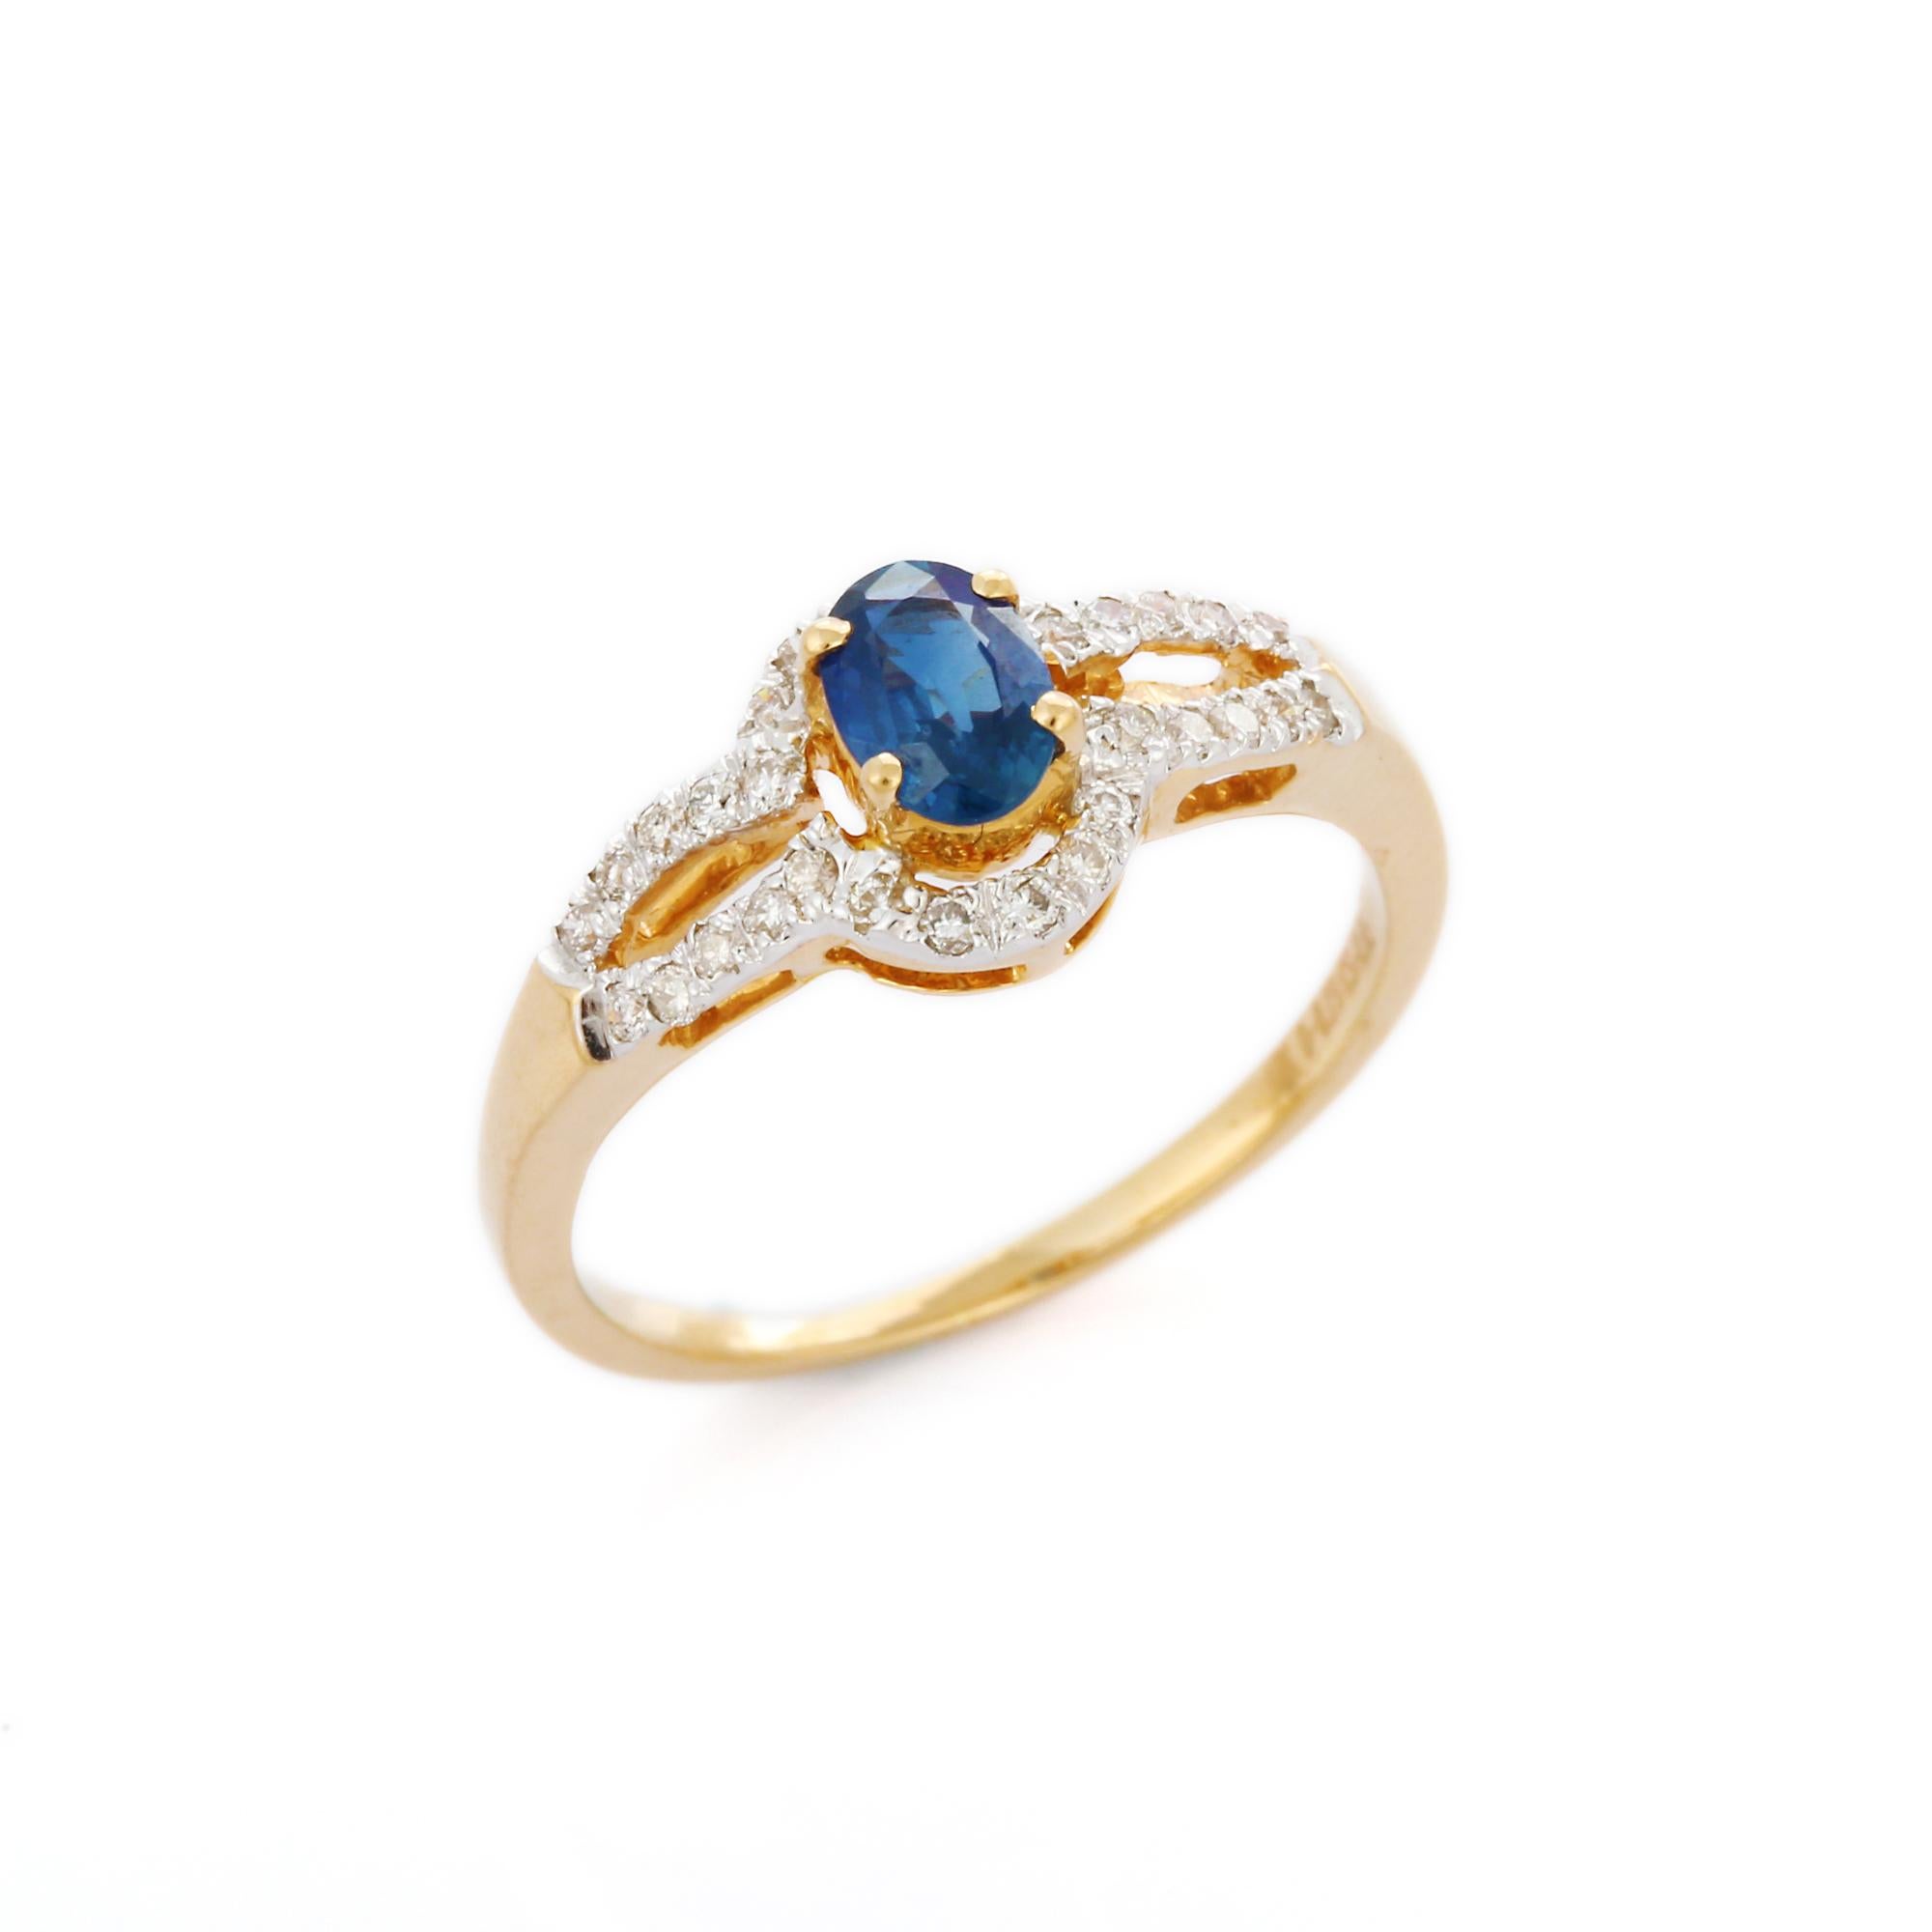 For Sale:  Simple Sapphire Diamond Engagement Ring in 18K Solid Yellow Gold 4